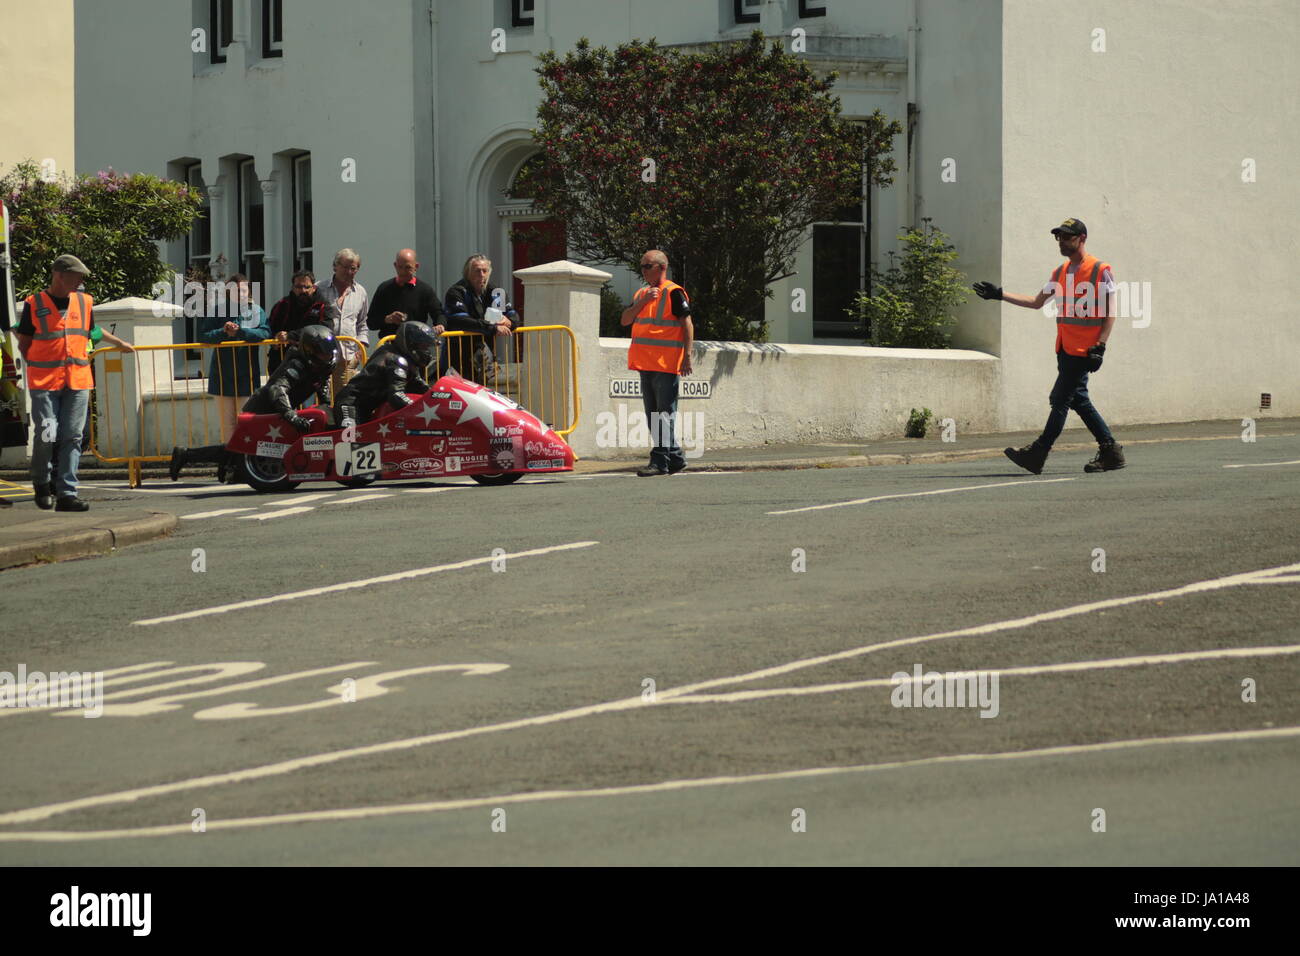 Isle of Man TT Races, Qualifying Practice Race, Saturday 3 June 2017.Sidecar Qualifying session. Marshals help Estelle Leblonde and Melanie Farnier of the Racingside team from Pigeon, France move their 600cc SGR Suzuki sidecar (number 22) off the course into a side road . The riders make a quick roadside repair then are allowed to continue on towards the Mountain Road. (Photo series) Credit: Eclectic Art and Photography/Alamy Live News Stock Photo